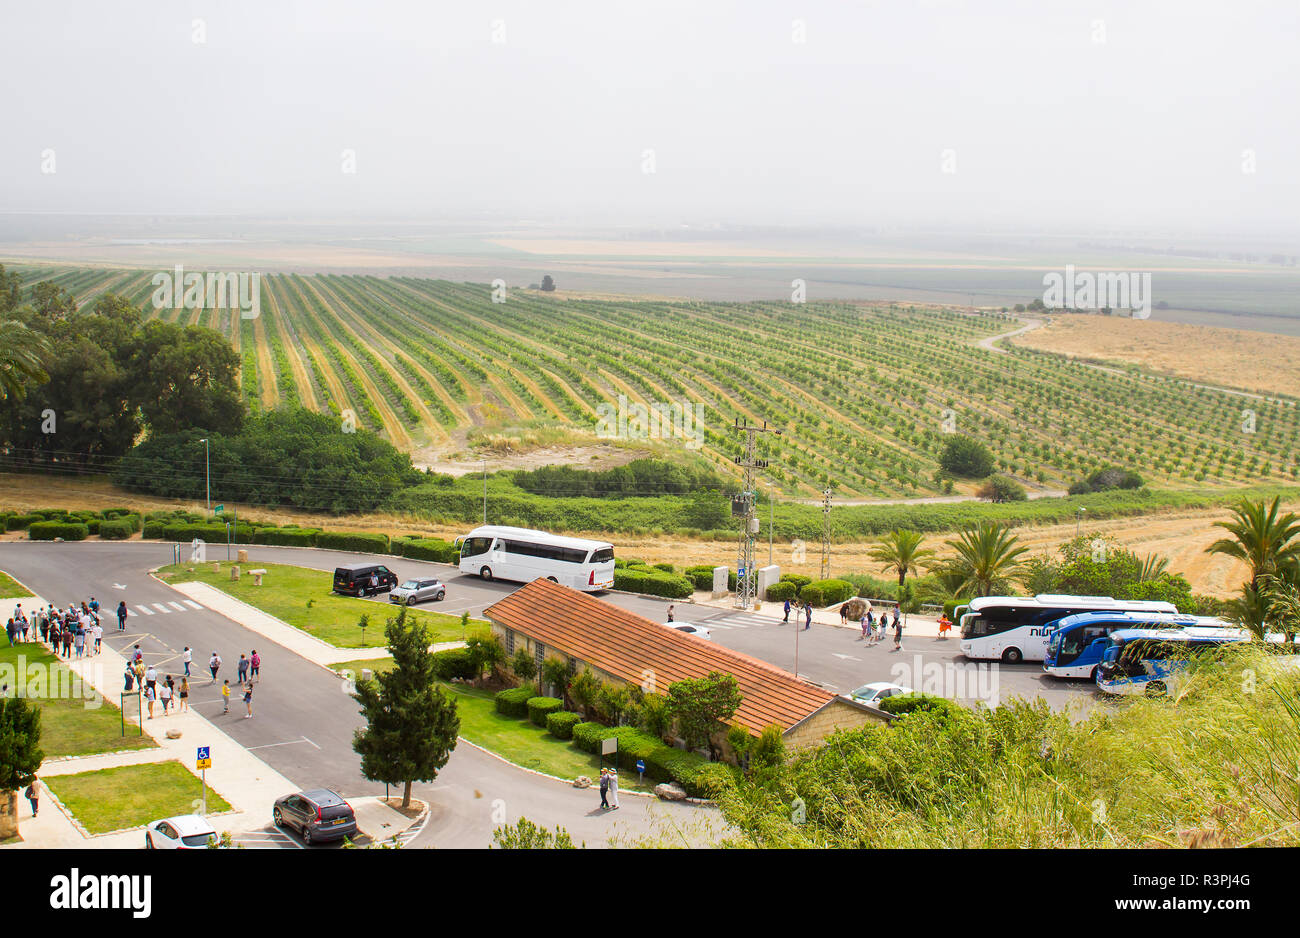 The fertile Valley of Jezreel taken from the historic Tel Megiddo in Lower Galilee Israel. Te car park for visitors is in the foreground Stock Photo